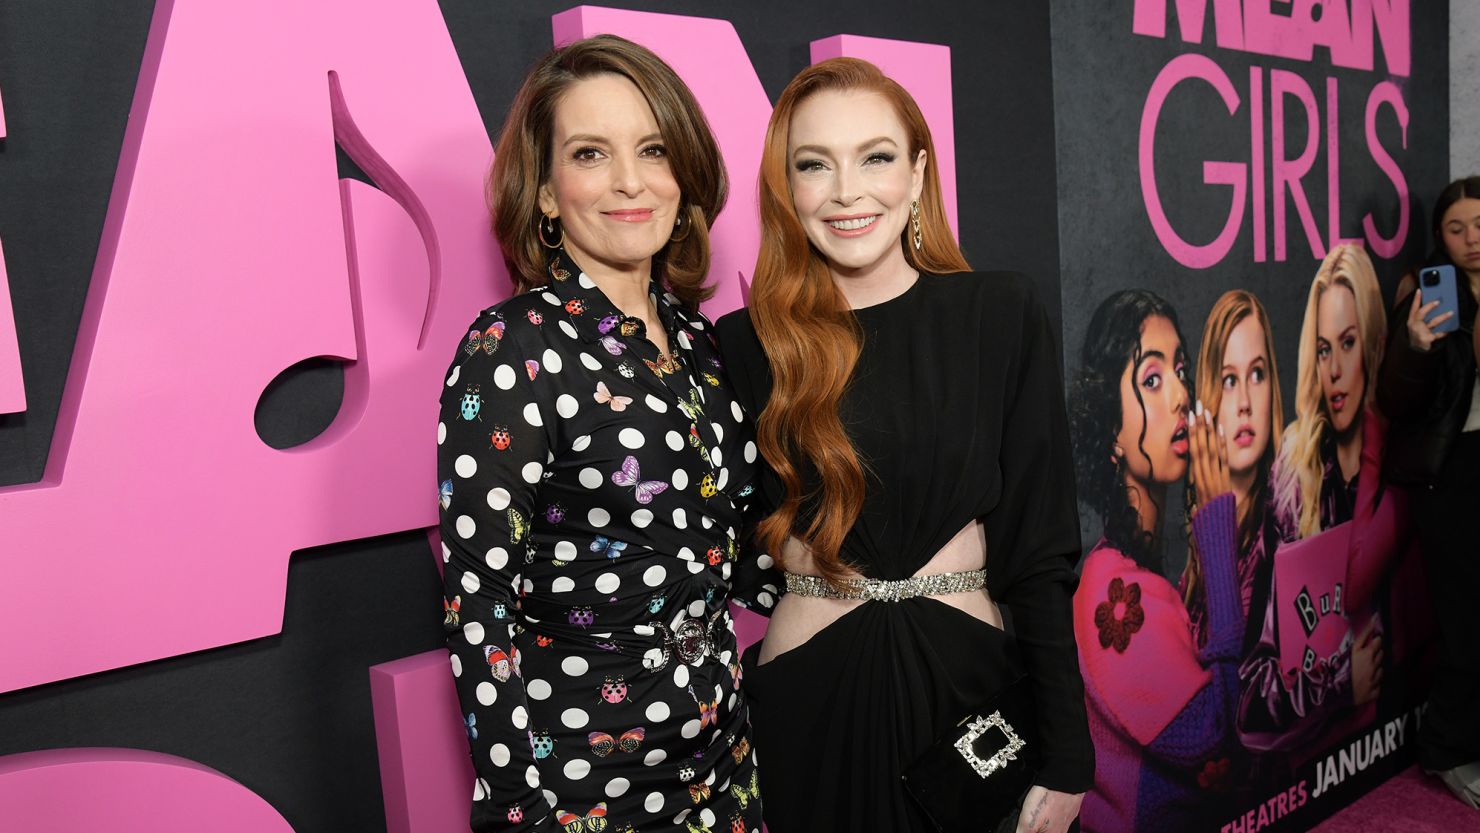 Tina Fey and Lindsay Lohan at the premiere of "Mean Girls" held at AMC Lincoln Square on January 8, 2024 in New York City. (Photo by Kristina Bumphrey/Variety via Getty Images)